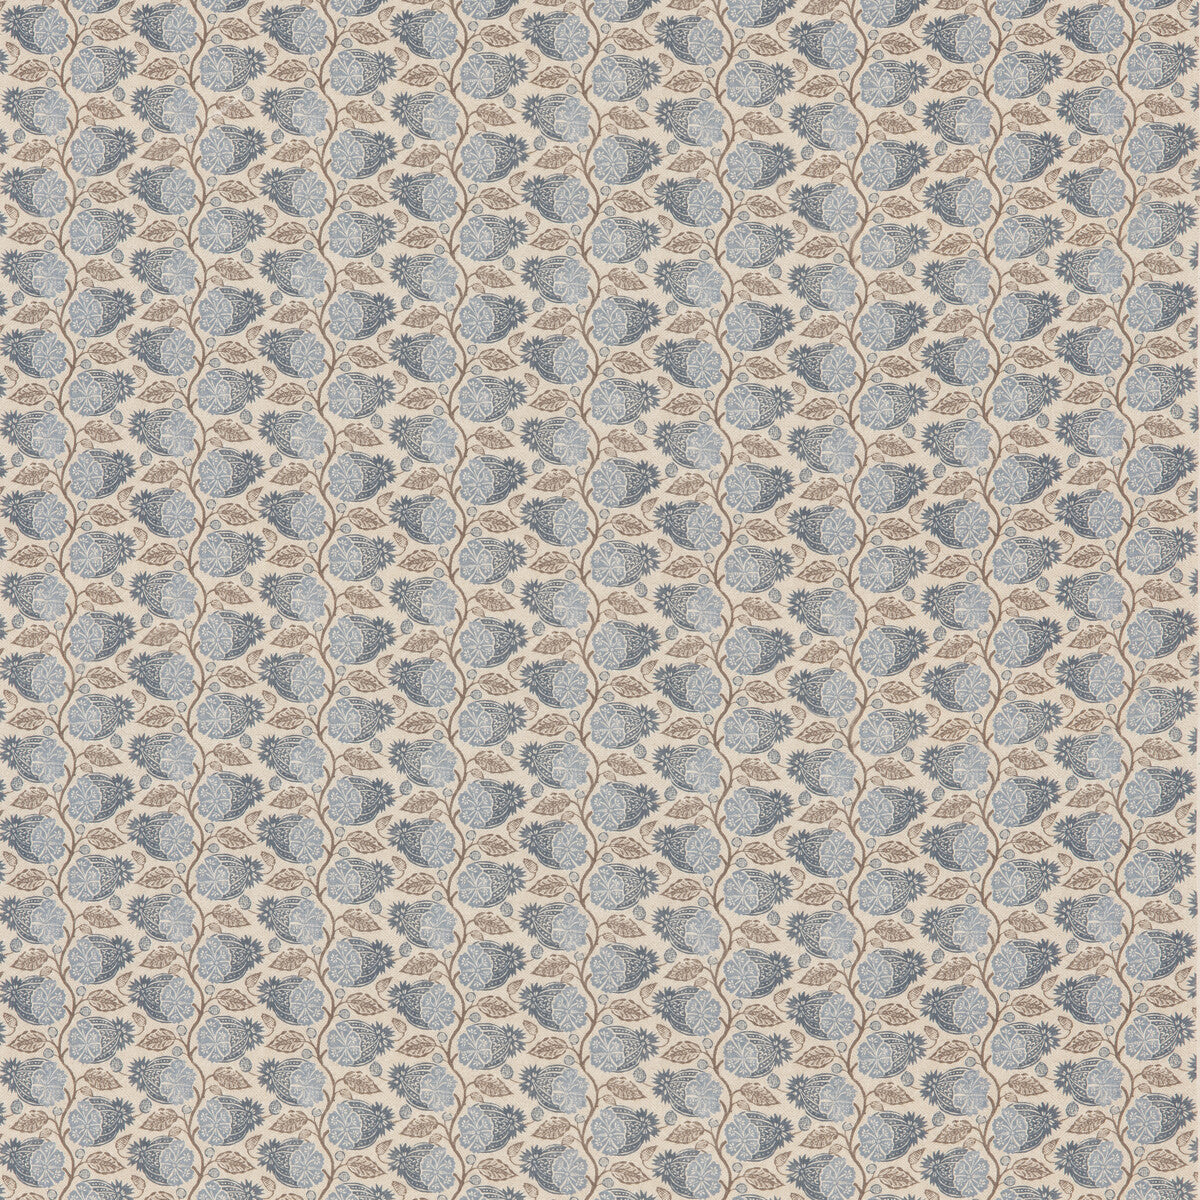 Calcot fabric in indigo color - pattern BP11000.1.0 - by G P &amp; J Baker in the House Small Prints collection